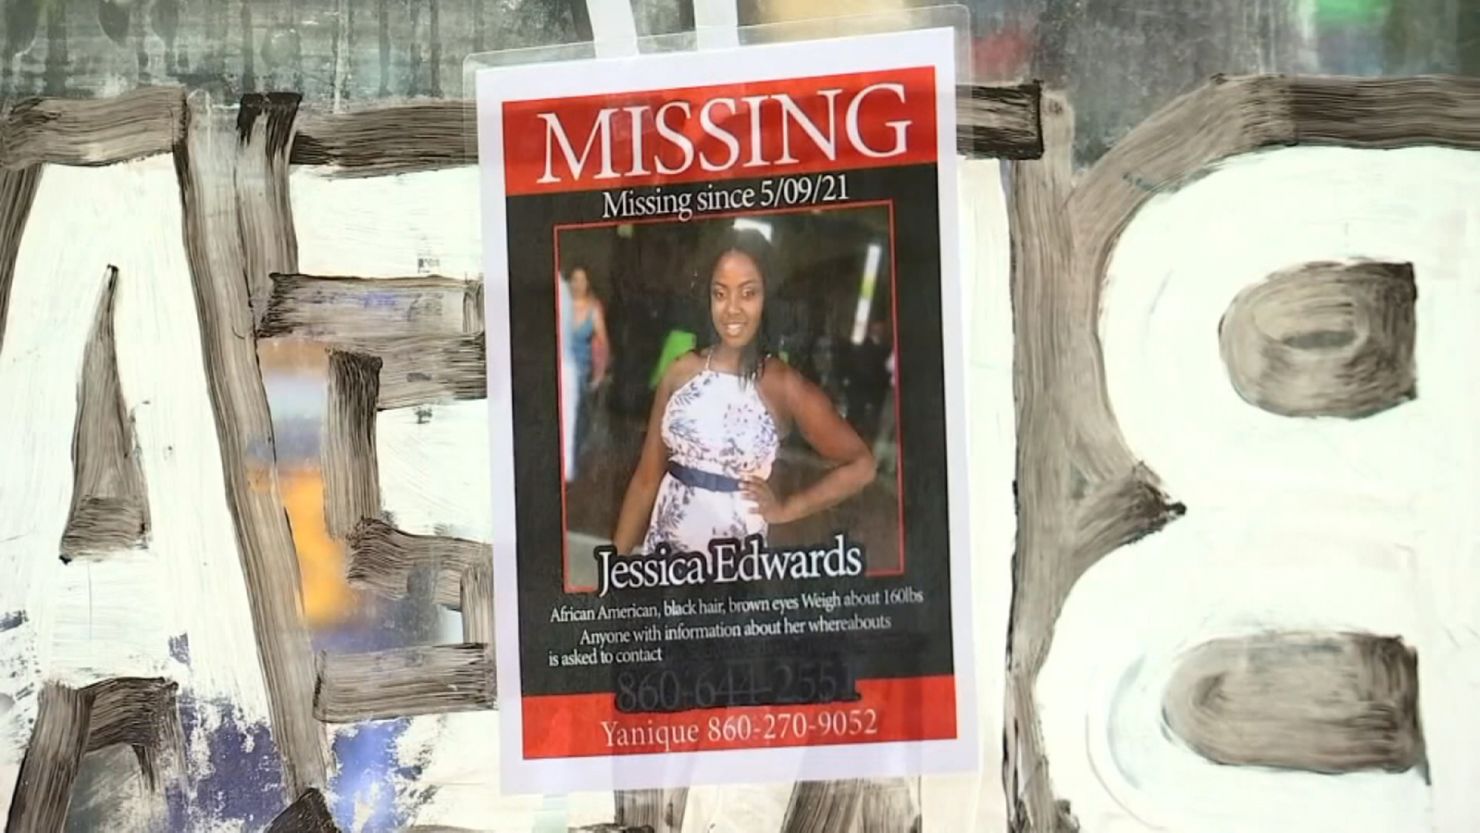 Jessica Edwards, 30, went missing earlier this month in Connecticut.